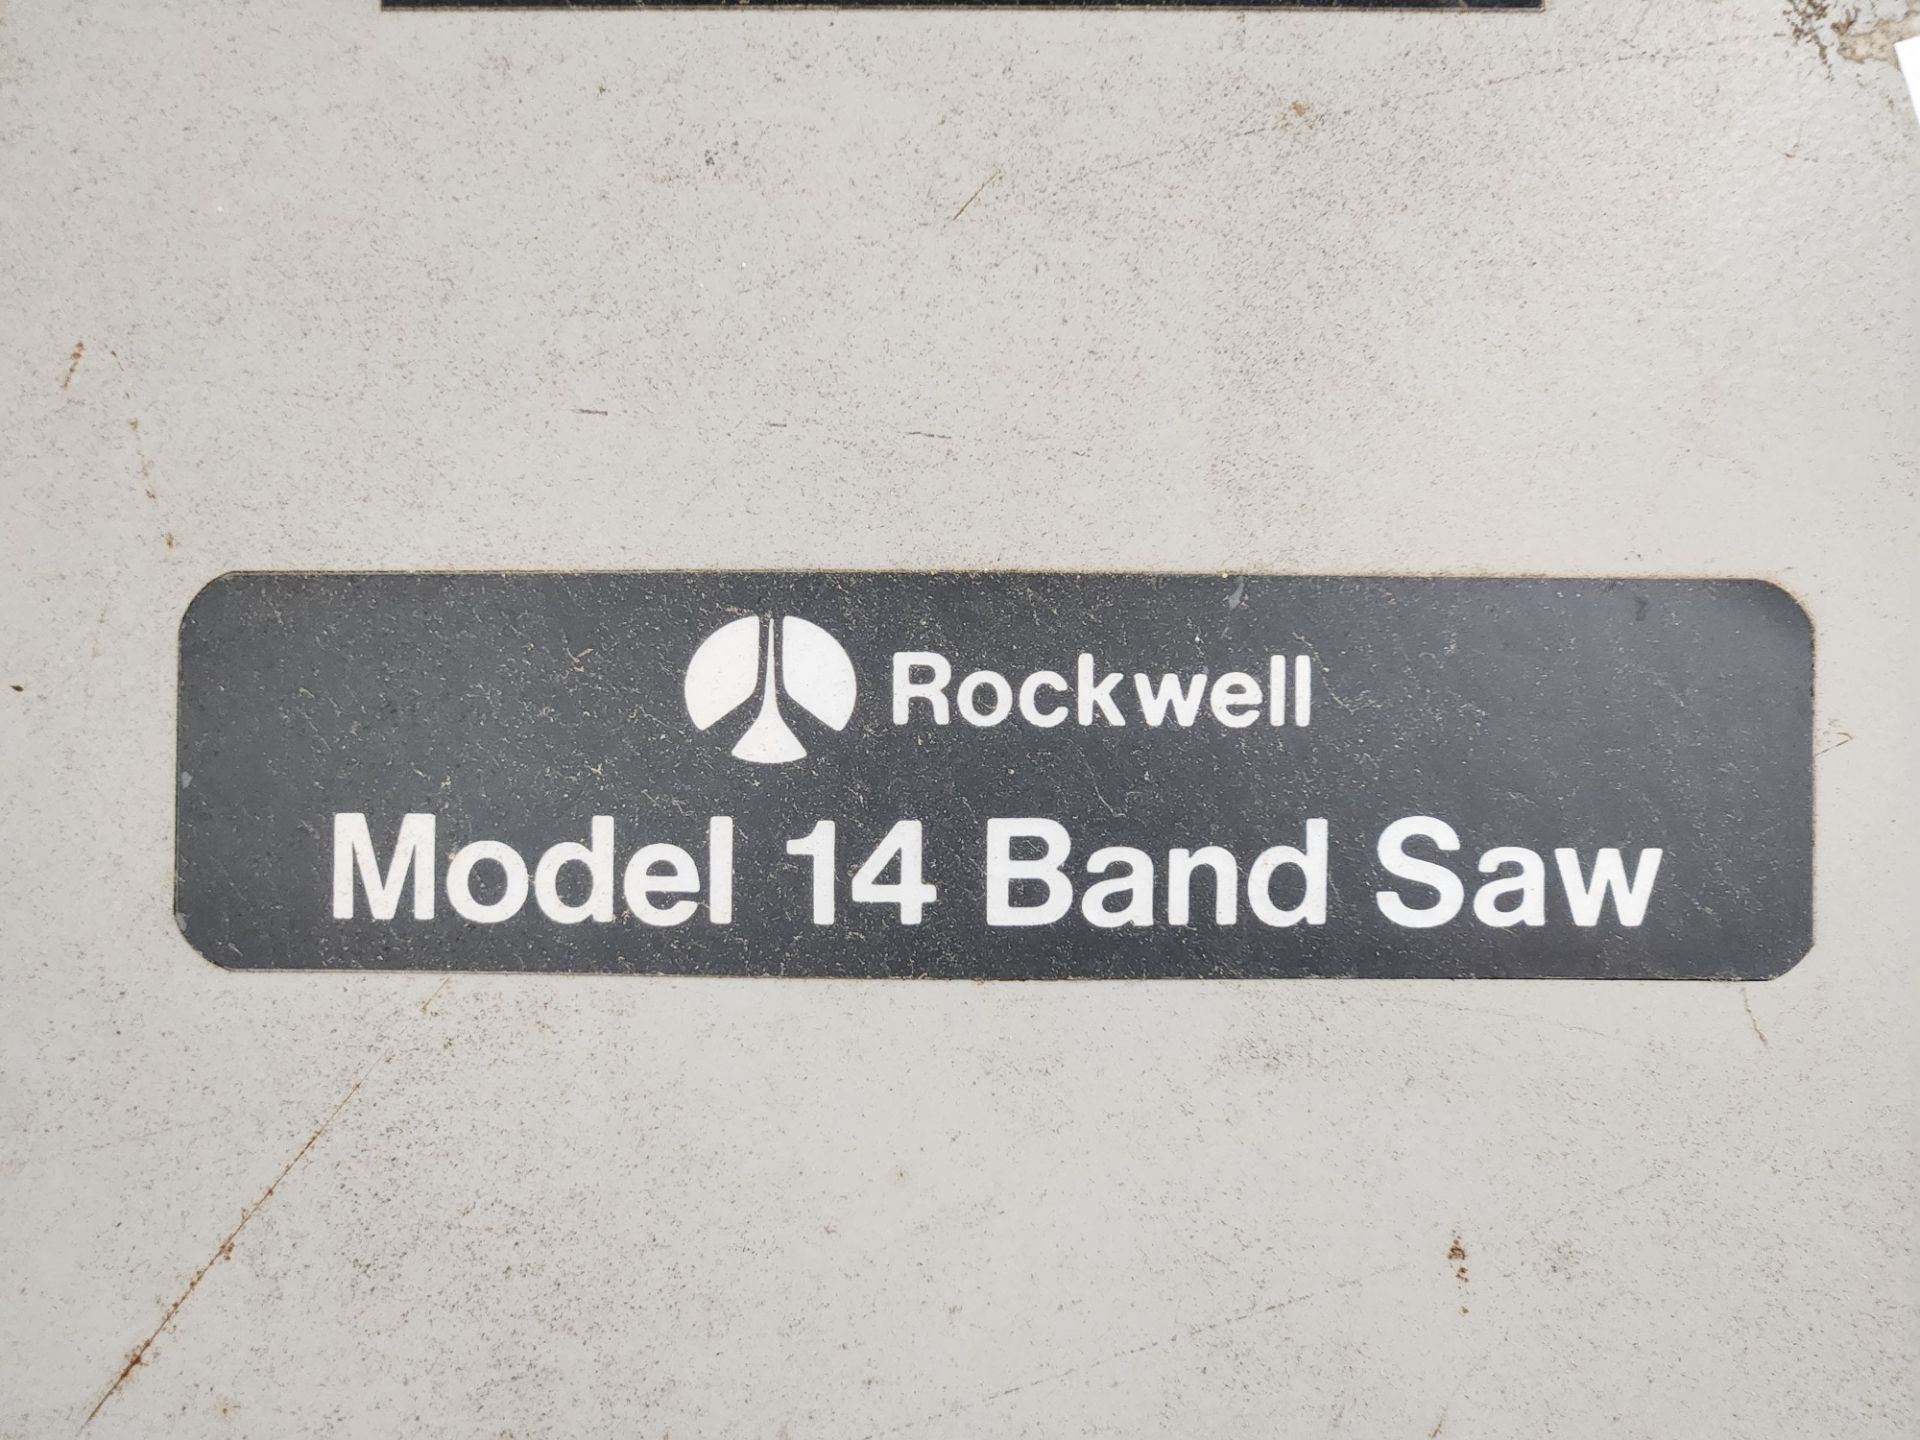 Rockwell Model 14 Band Saw - Image 3 of 5